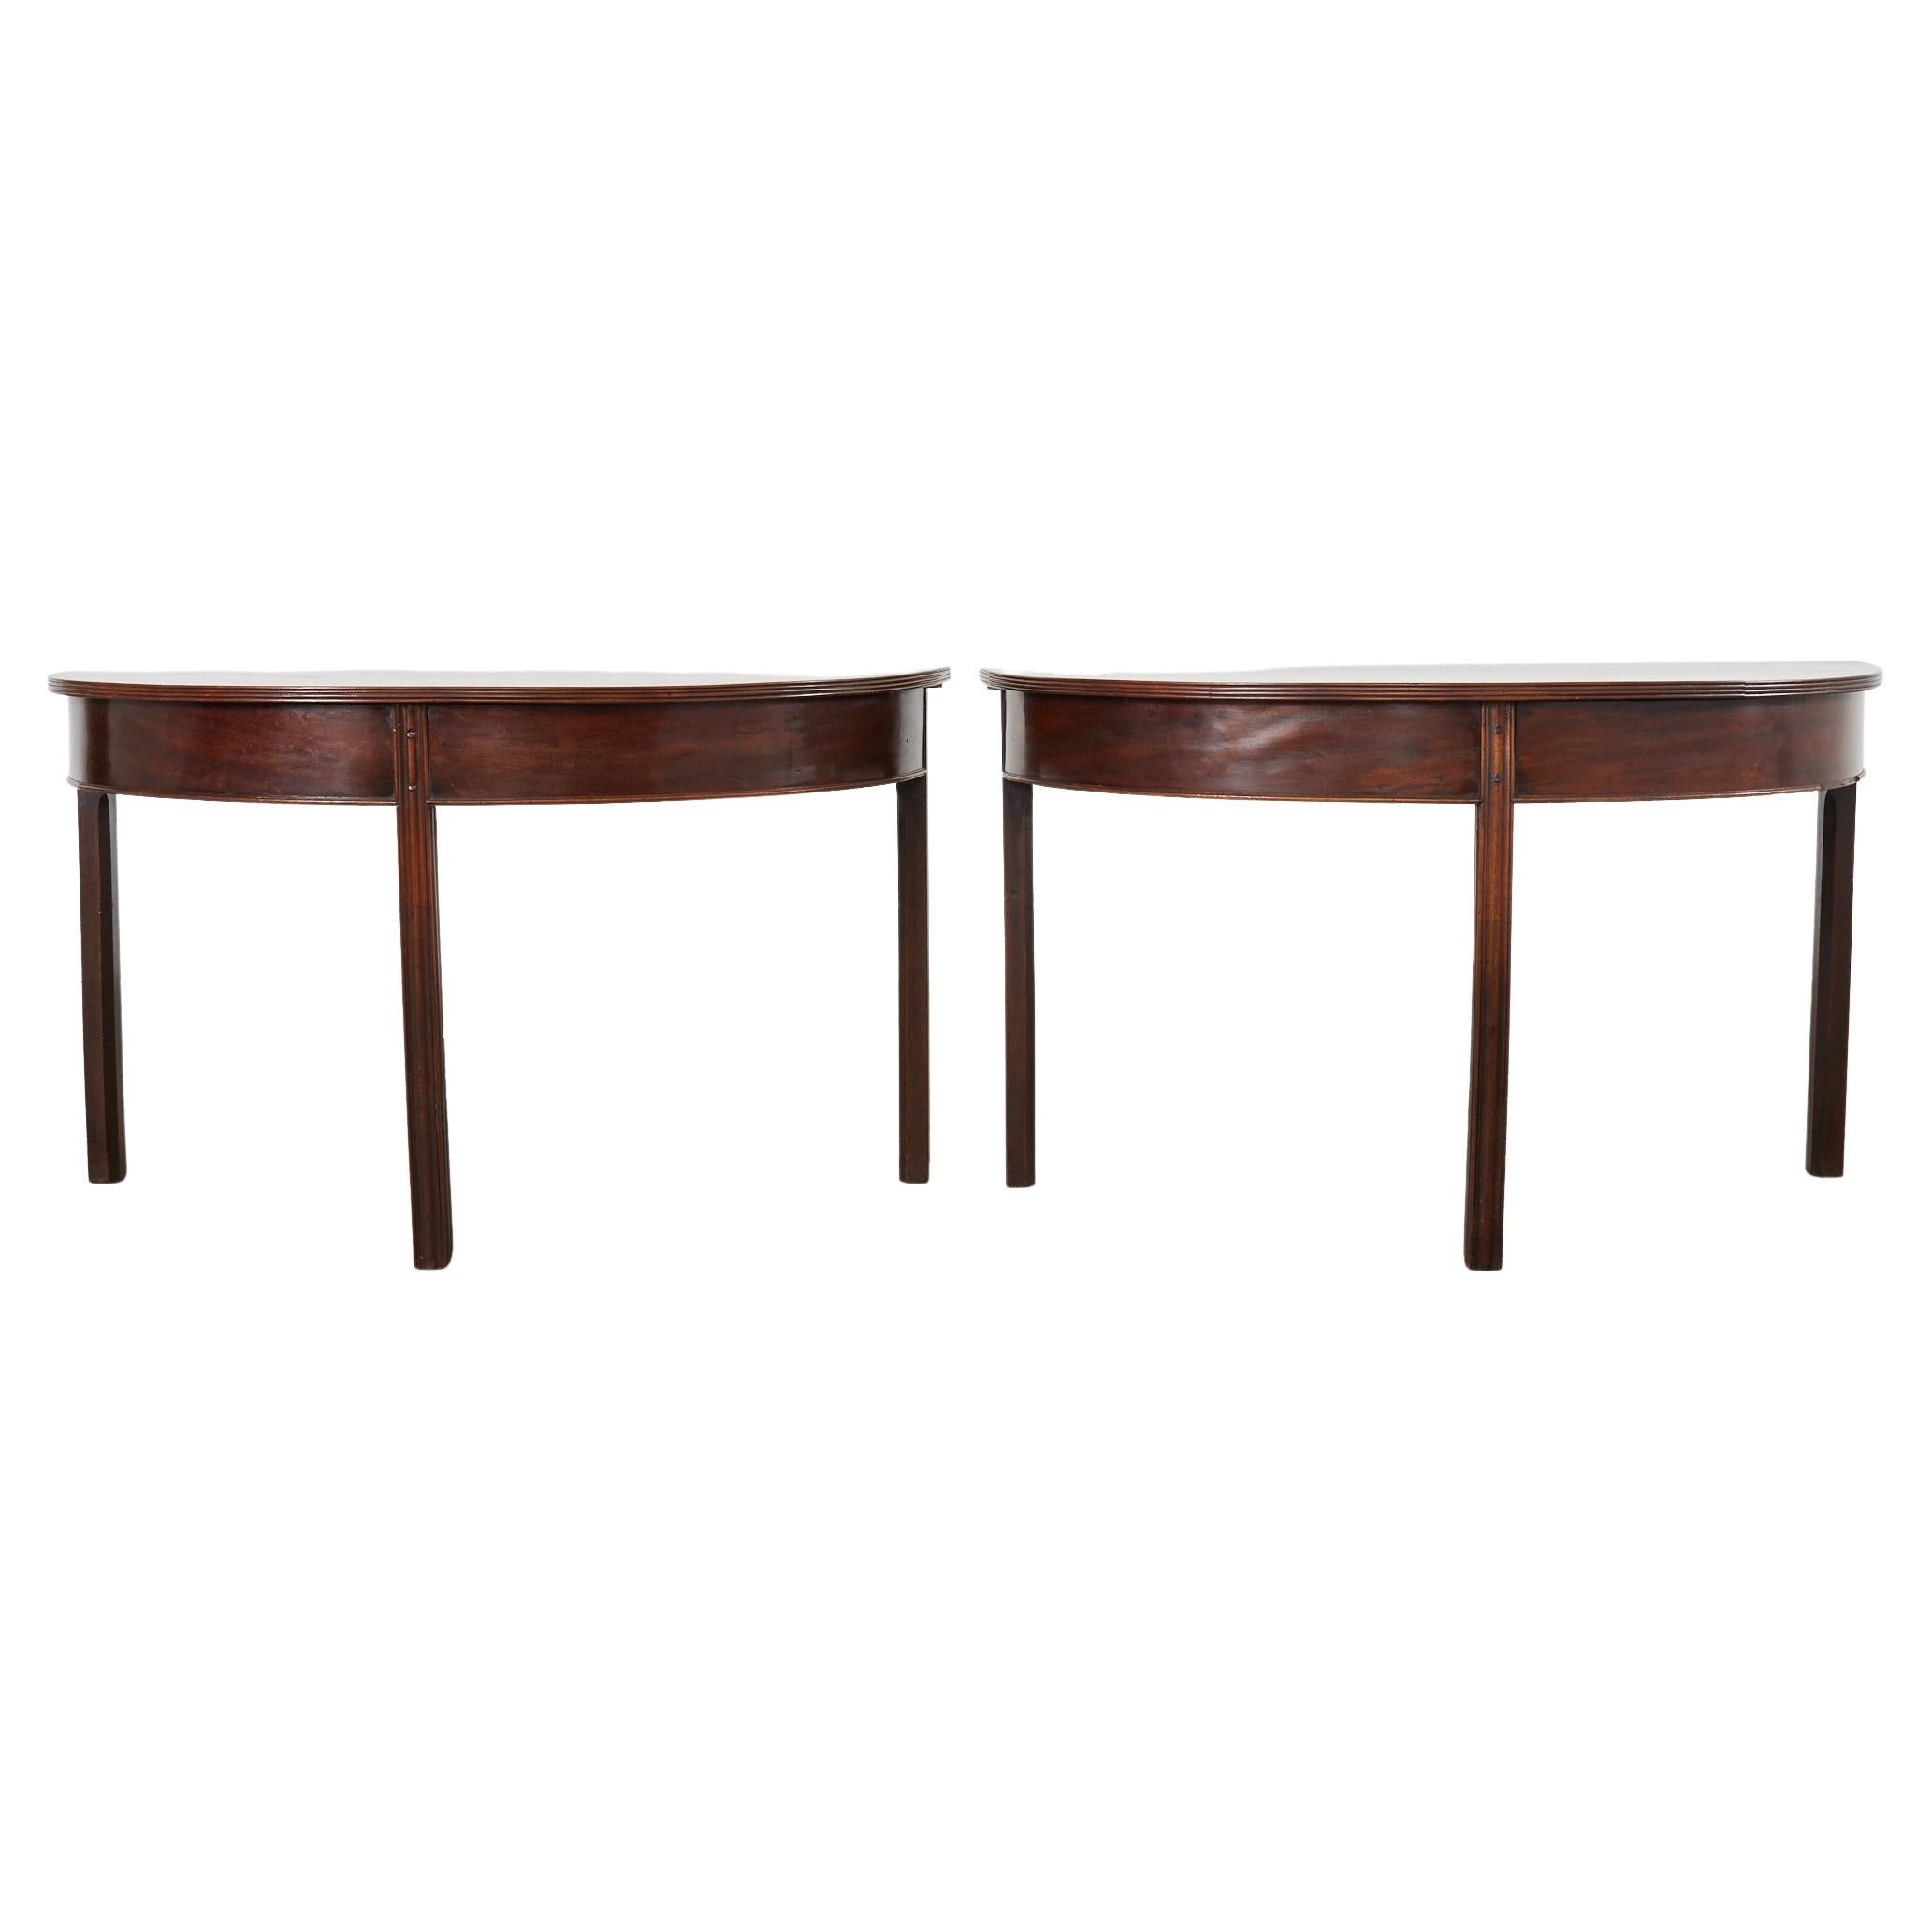 Pair of 19th Century Georgian Mahogany Demilune Console Tables For Sale